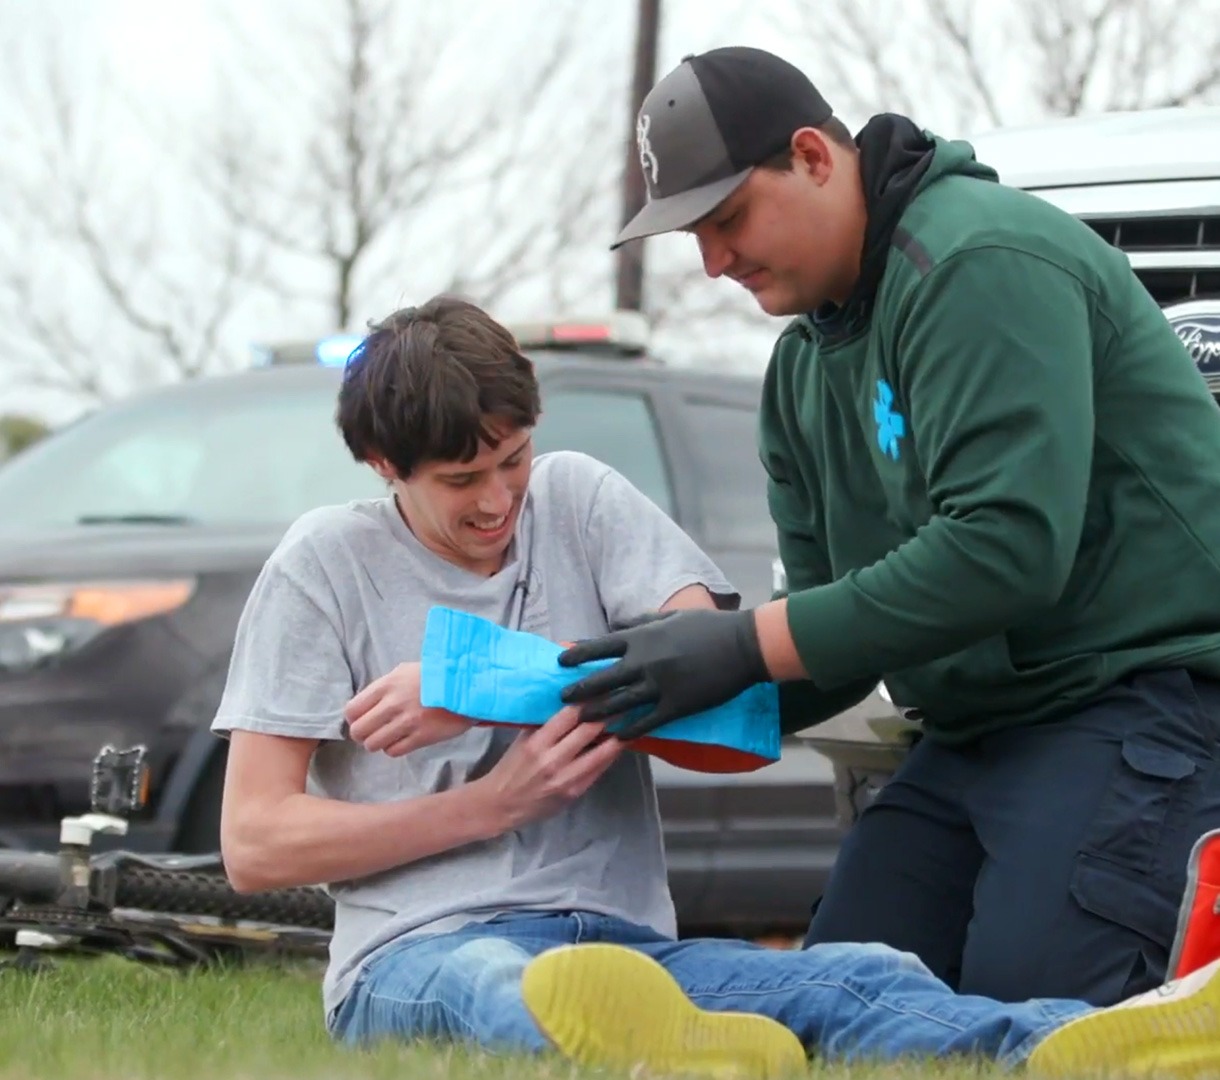 Student in Wilderness EMS training